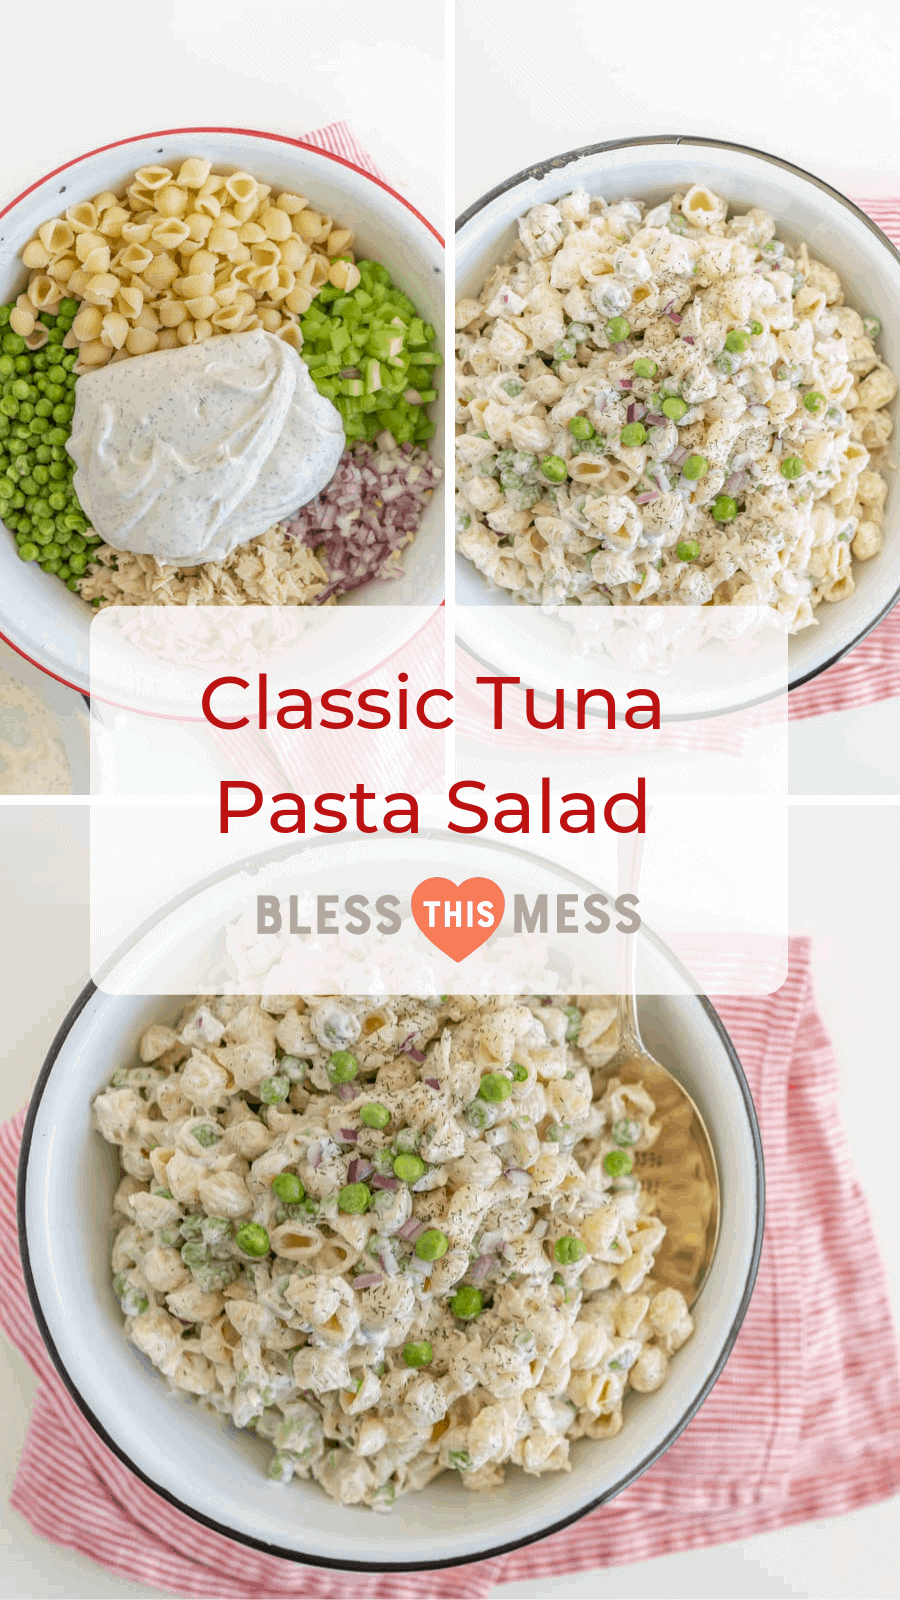 A light and refreshing Classic Tuna Pasta Salad comes together as the perfect summer side dish with white tuna, shell noodles, celery, peas, and a creamy dill sauce. 